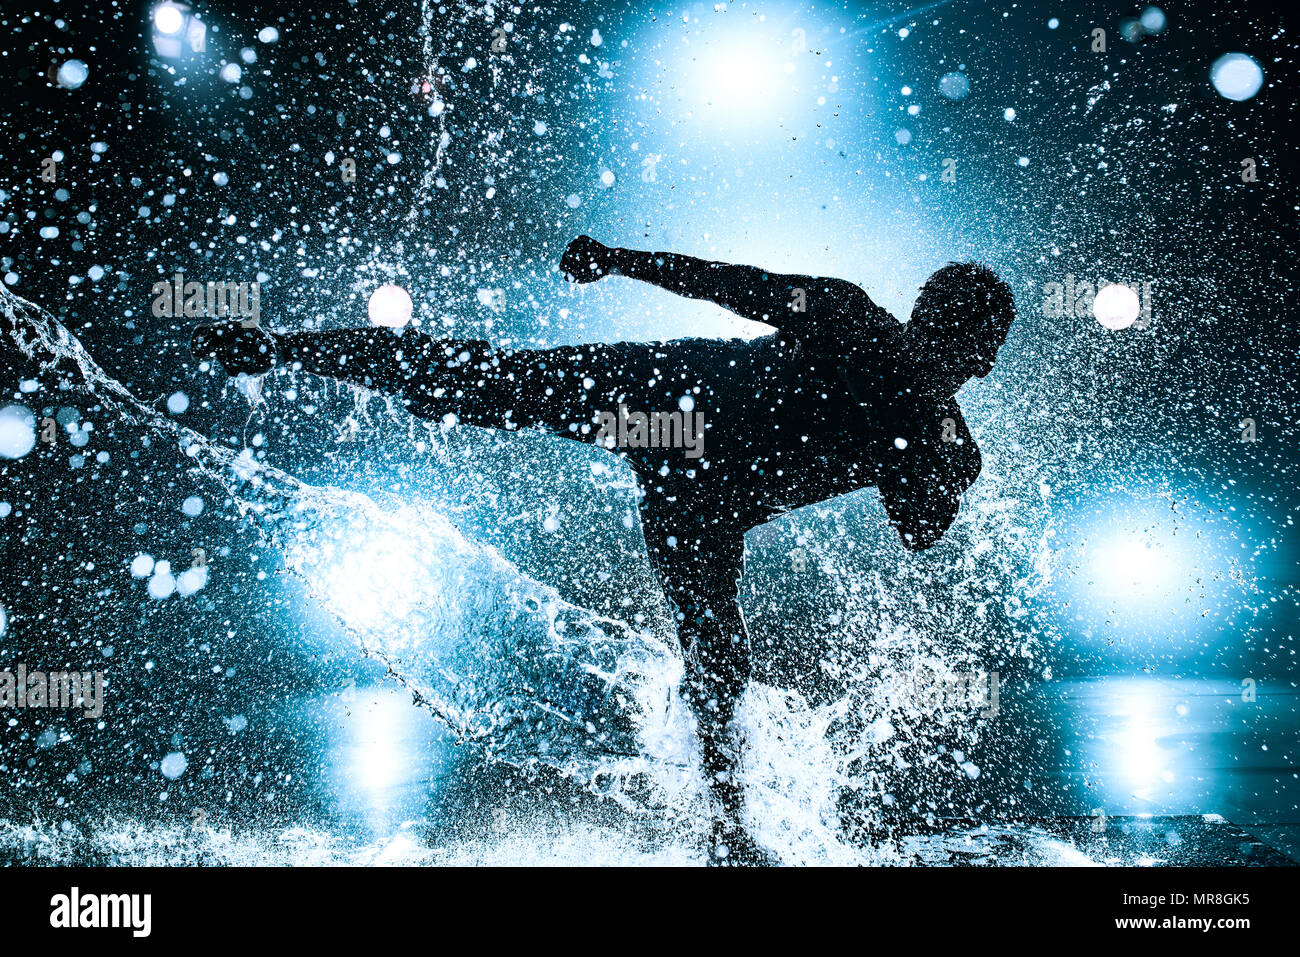 Young man break dancing in club with lights and water. Blue tint colors and dramatic silhouette. Stock Photo